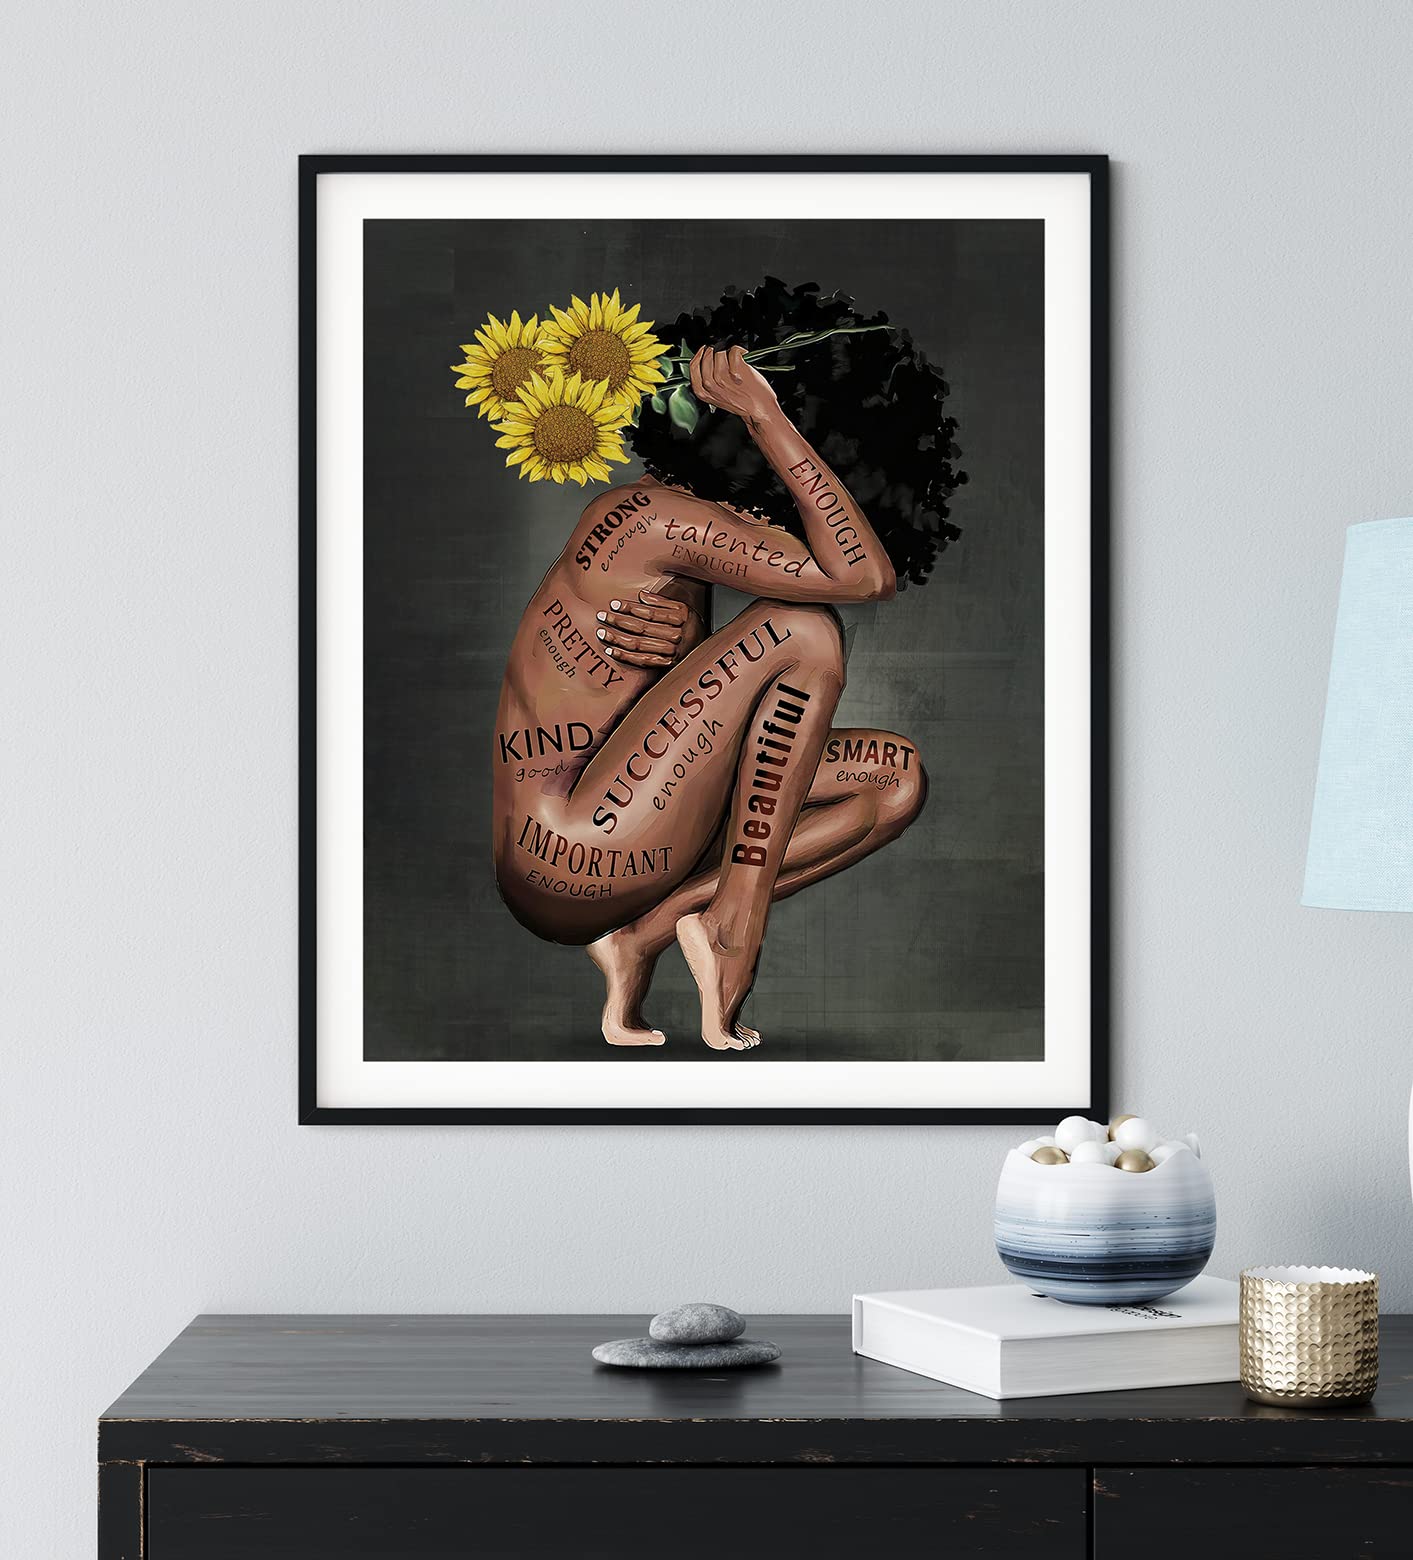 Black Women Poster African American Wall Decor Black Queen Canvas Prints Black Women Portrait Wall Art Abstract Sunflower Canvas Printing Print for Office Bedroom Decorations 16X24 in UNFRAMED